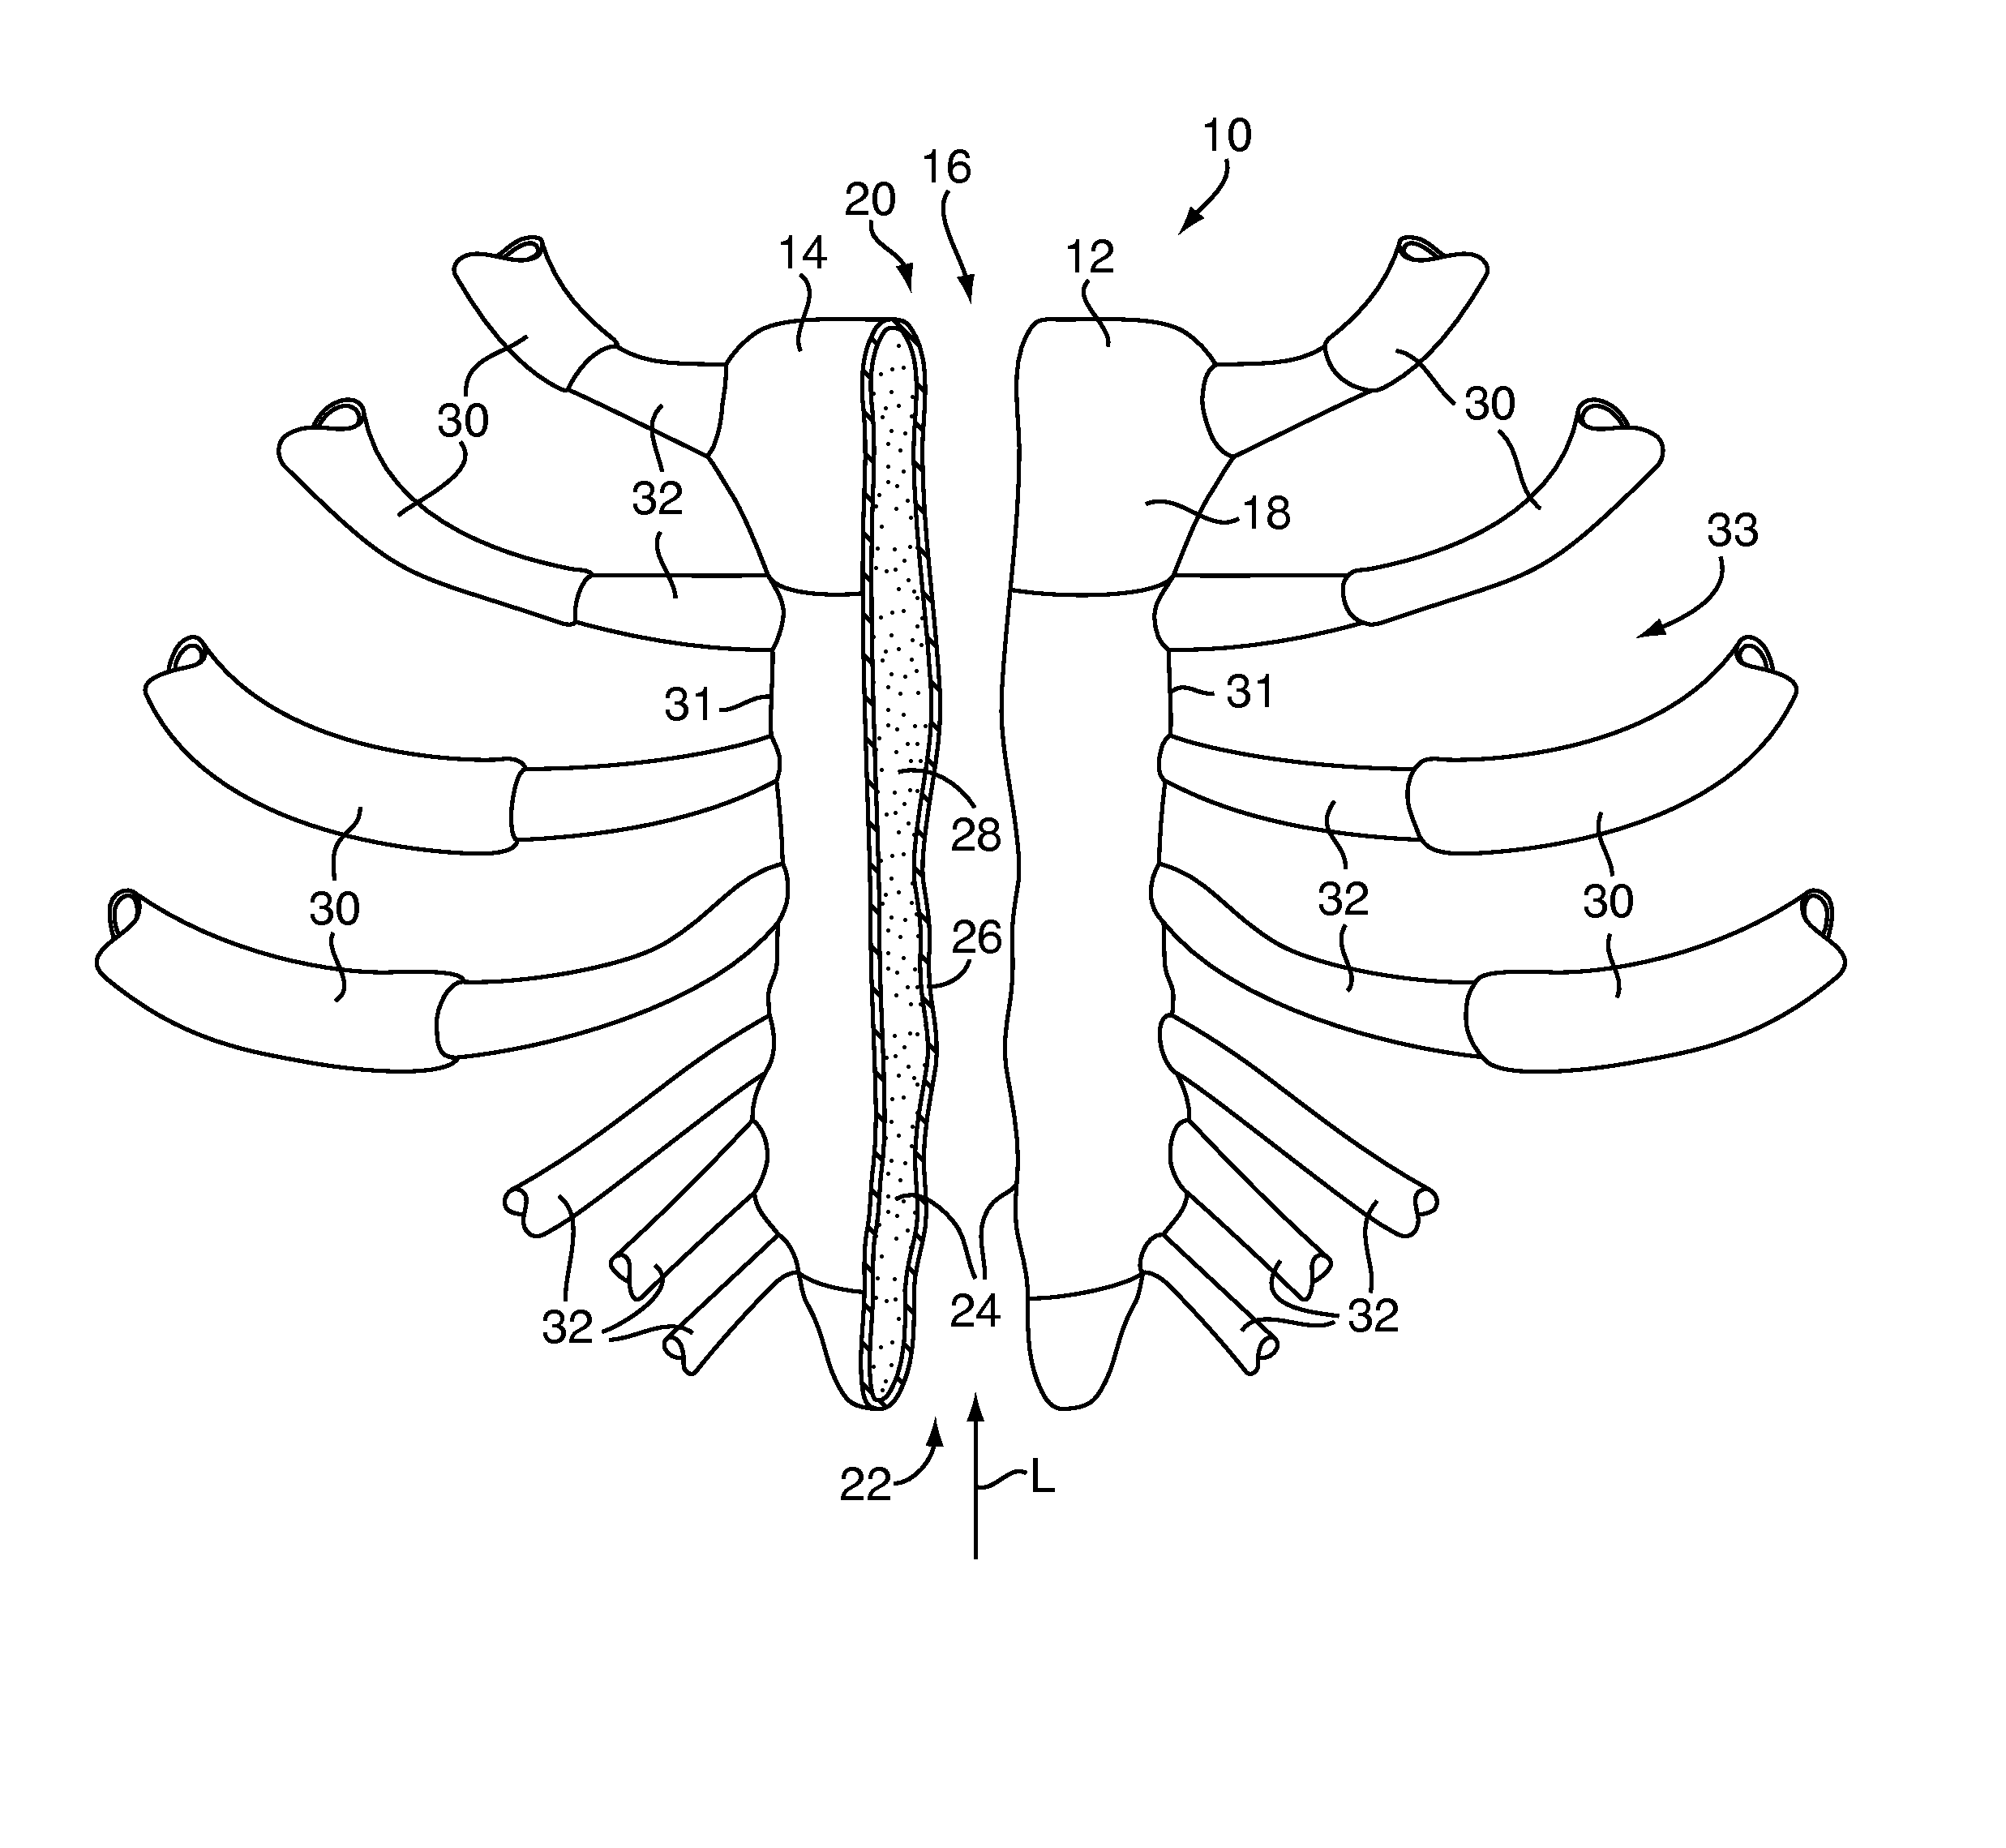 Methods and devices for sternal closure